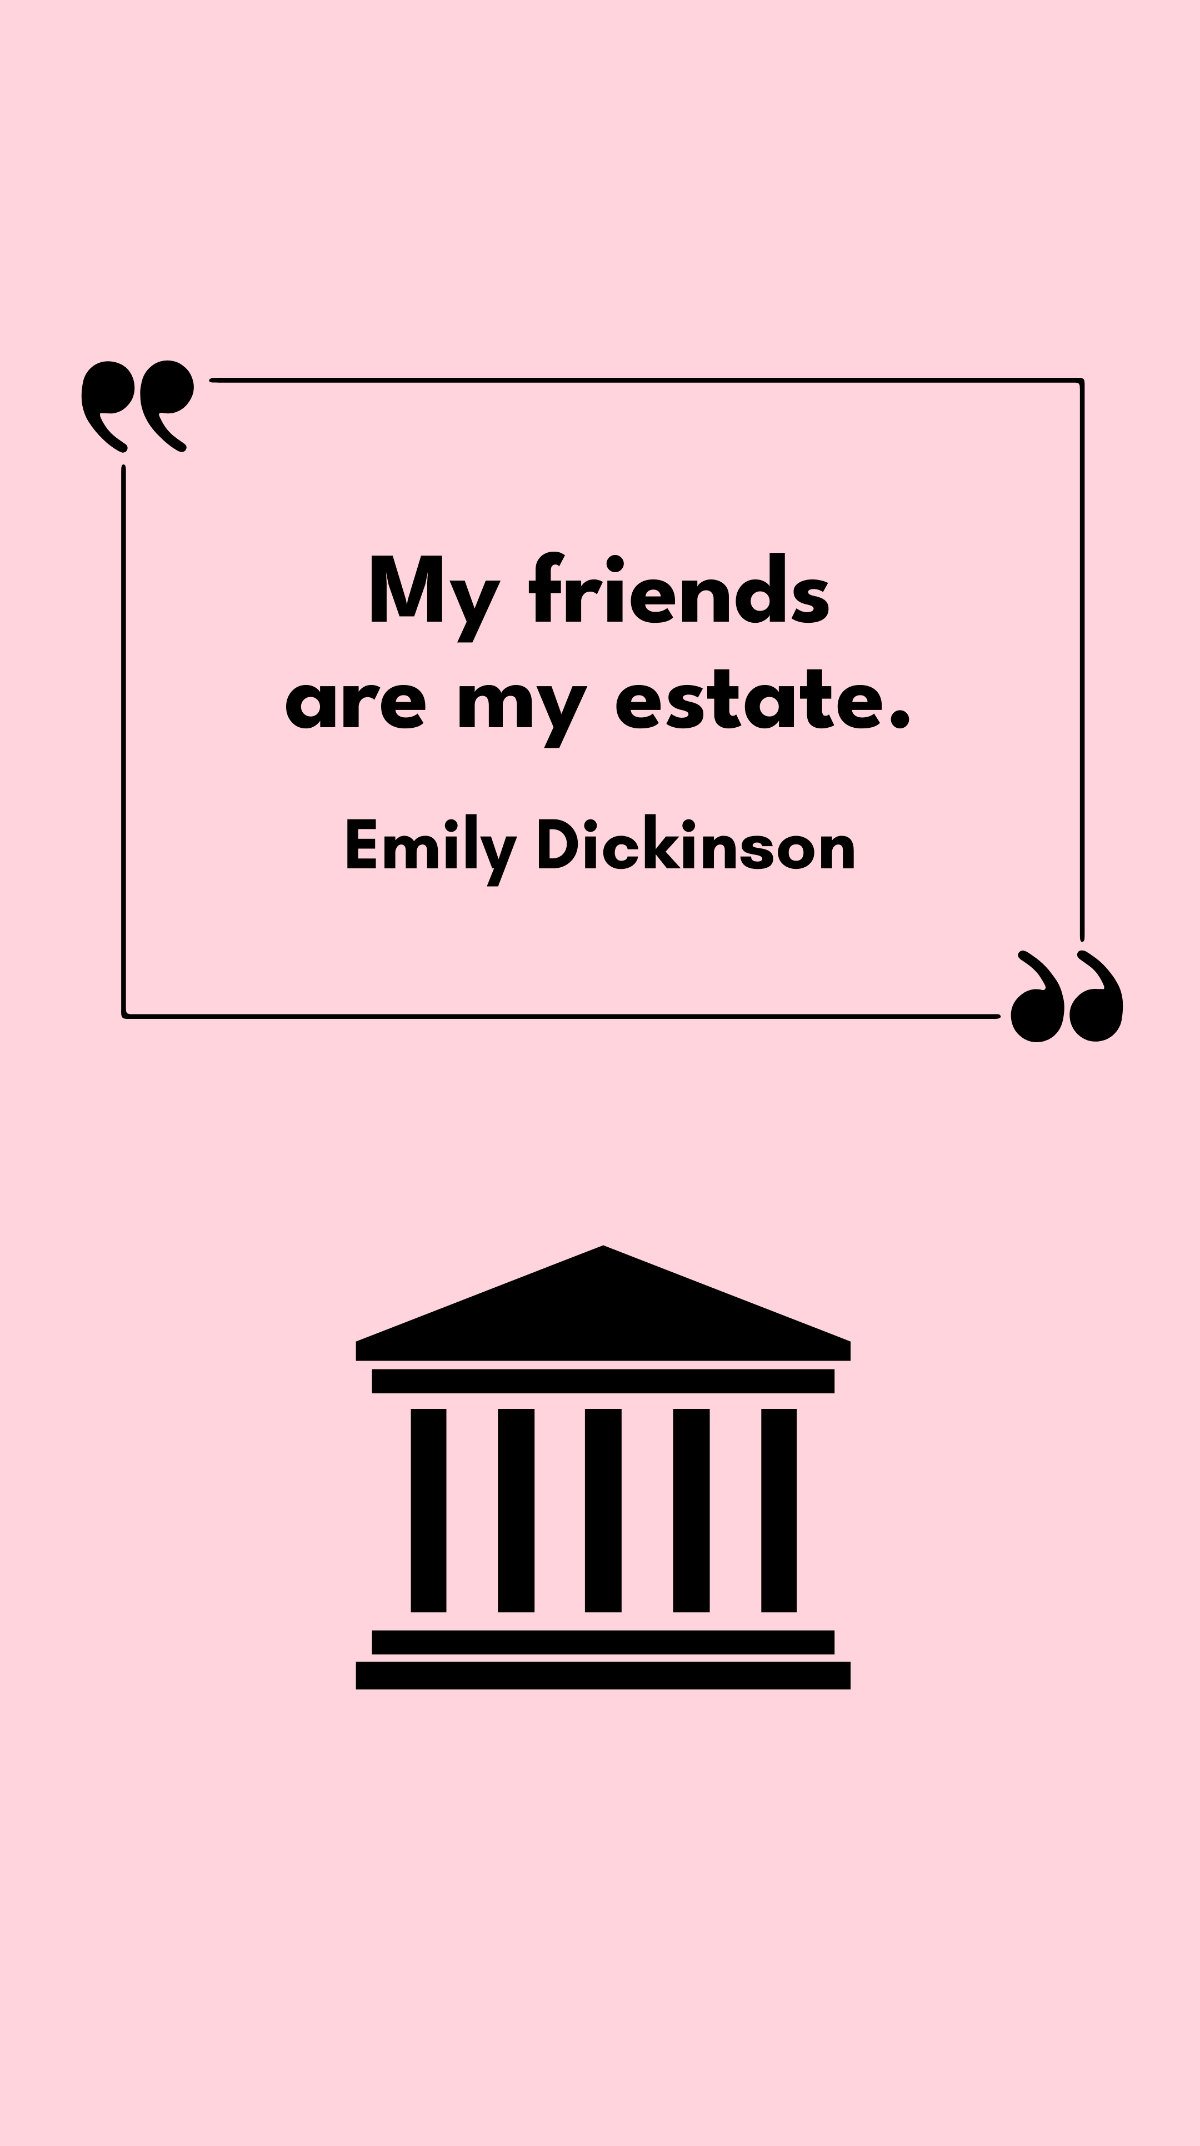 Emily Dickinson - My friends are my estate. Template